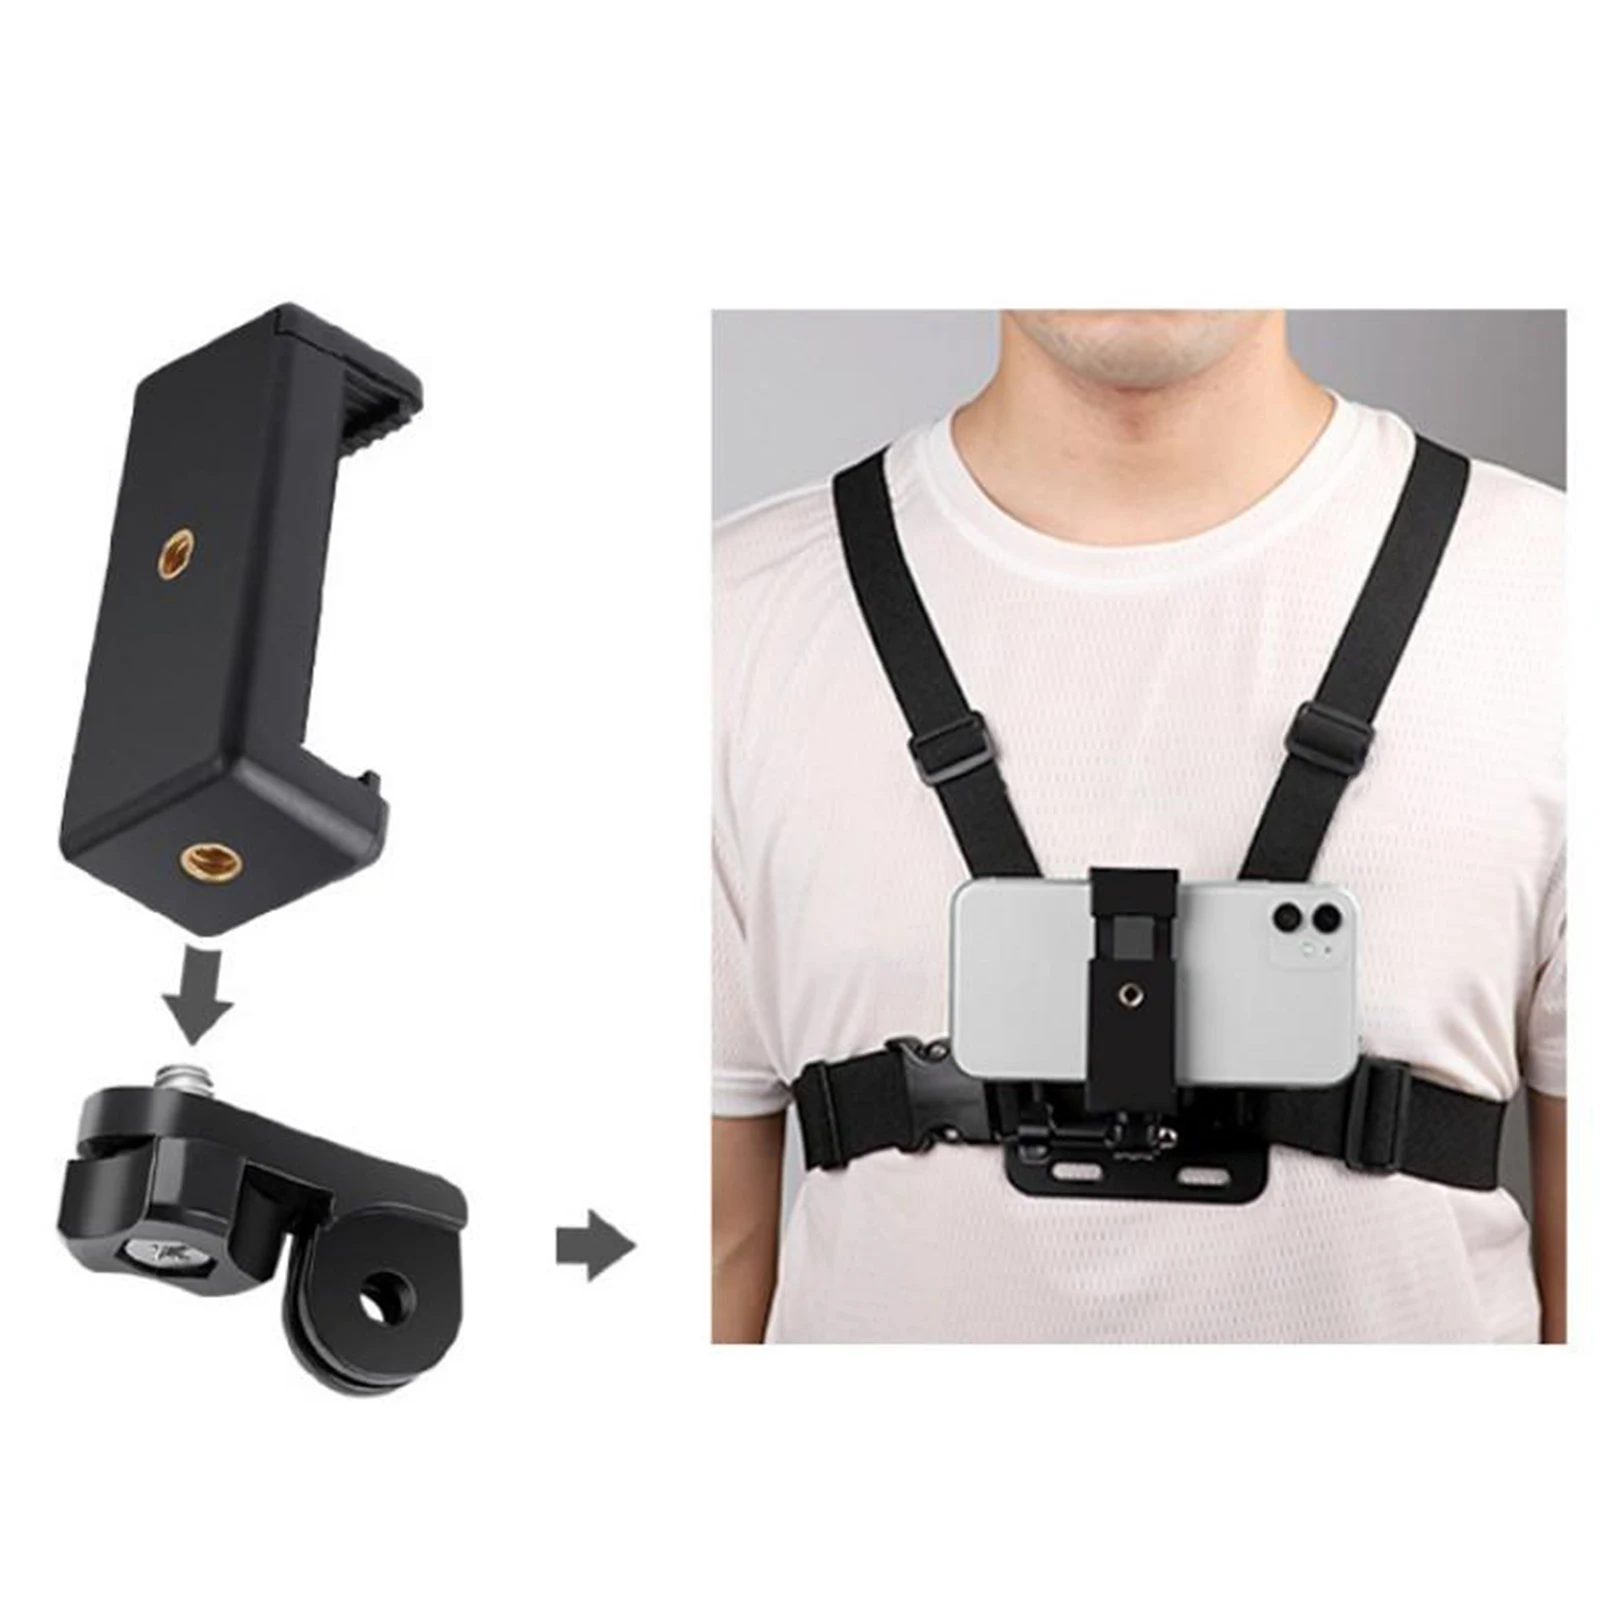 Smart Phone Body Chest Mount Harness Strap Mobile Phone Holder for Outdoor Sports Fitness Mobile Phone Shooting